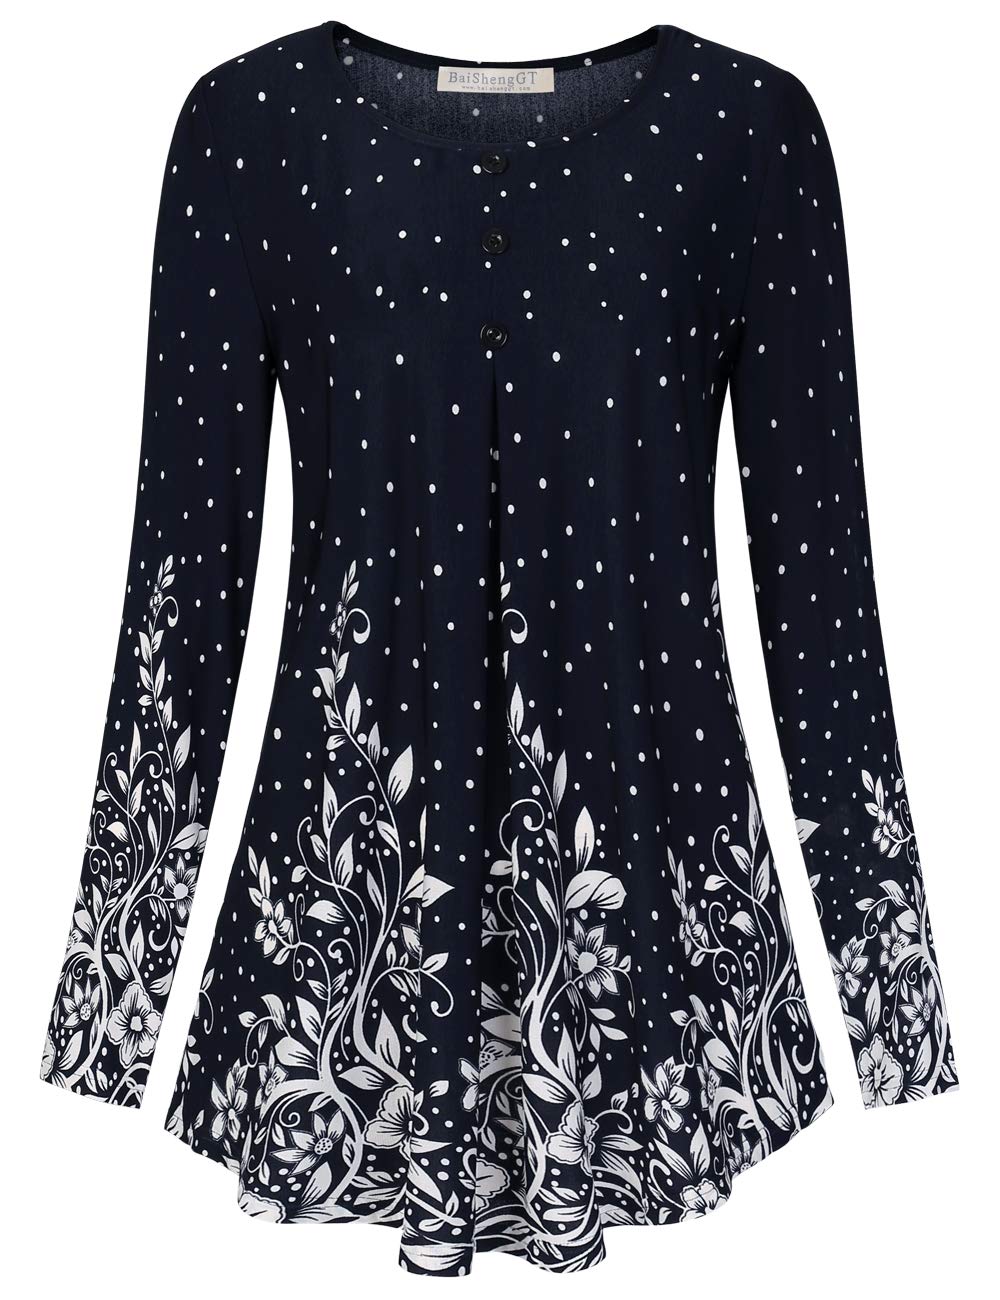 BAISHENGGT Navy Floral Long Sleeve Women's O Neck A line Blouse Floral Lace Tunic Tops